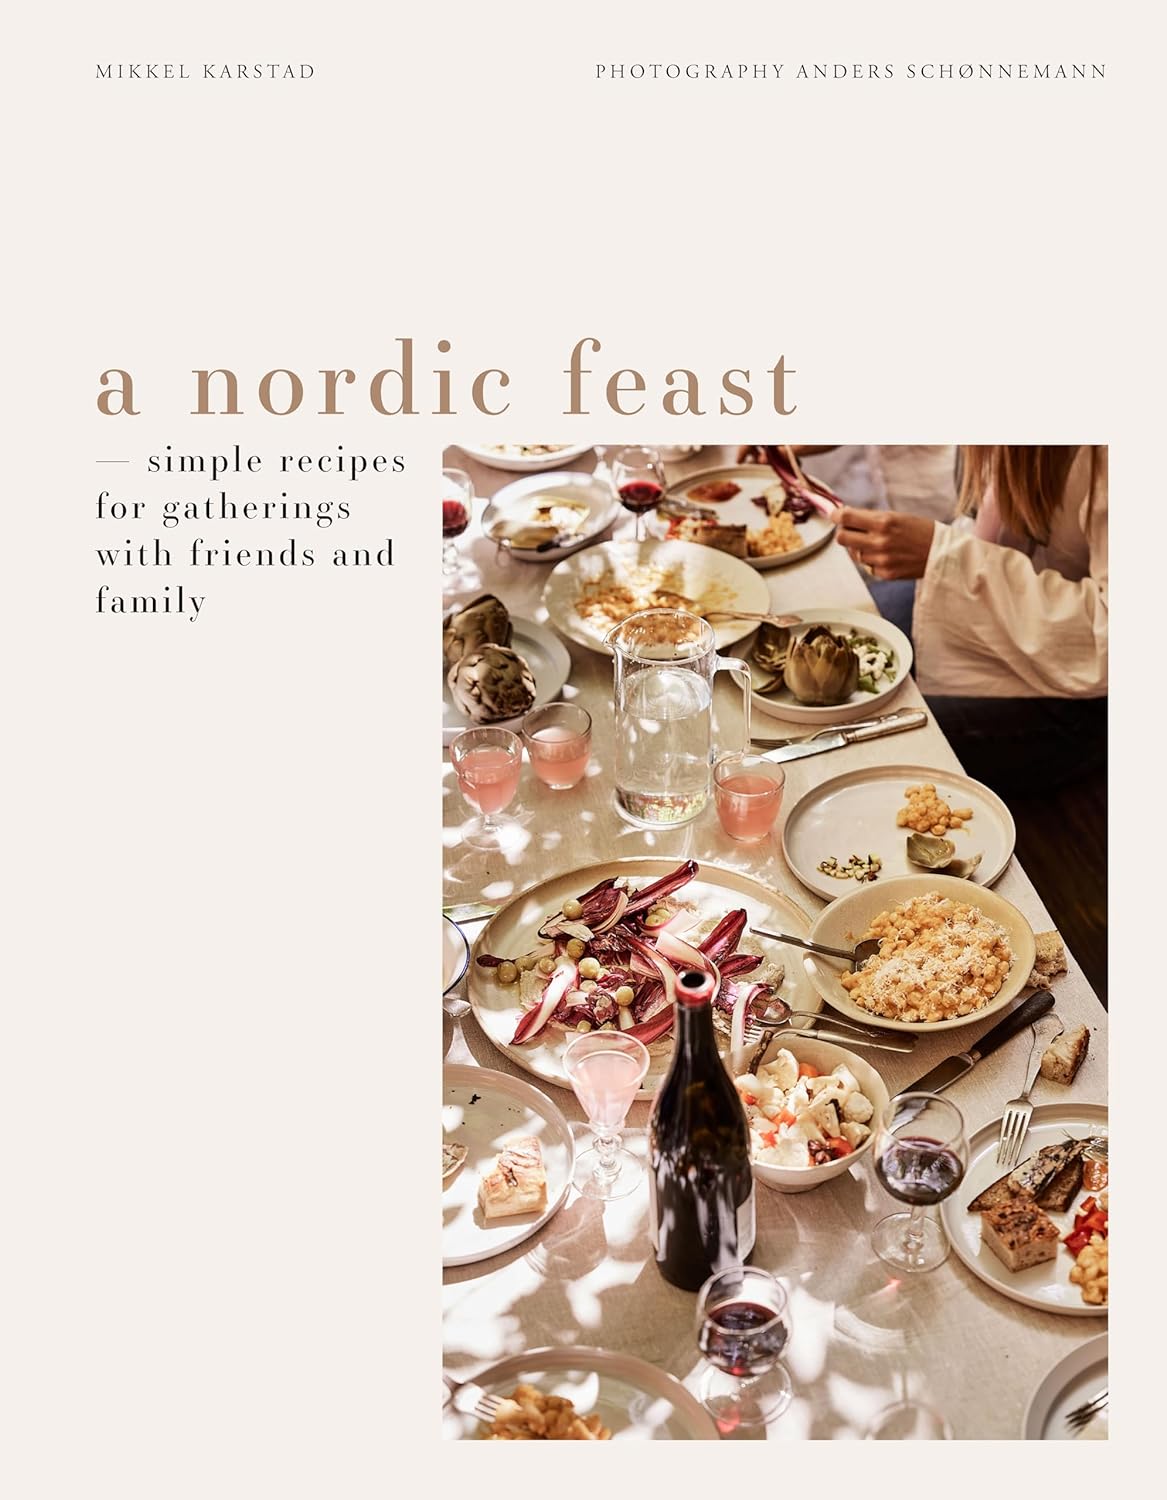 A Nordic Feast: Simple Recipes for Gatherings with Friends and Family (Mikkel Karstad)